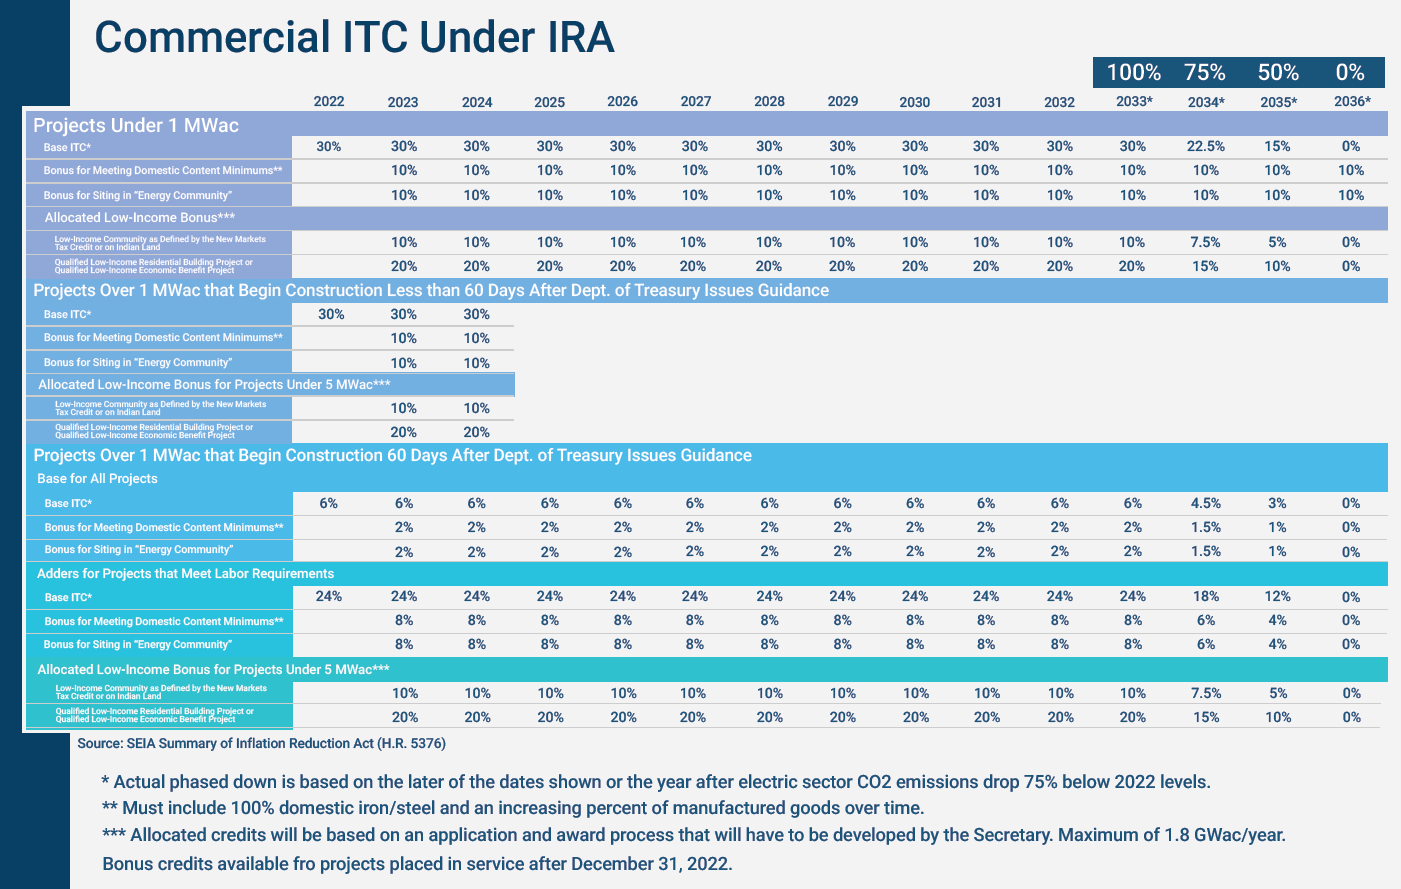 chart detailing the commercial ITC breakdown